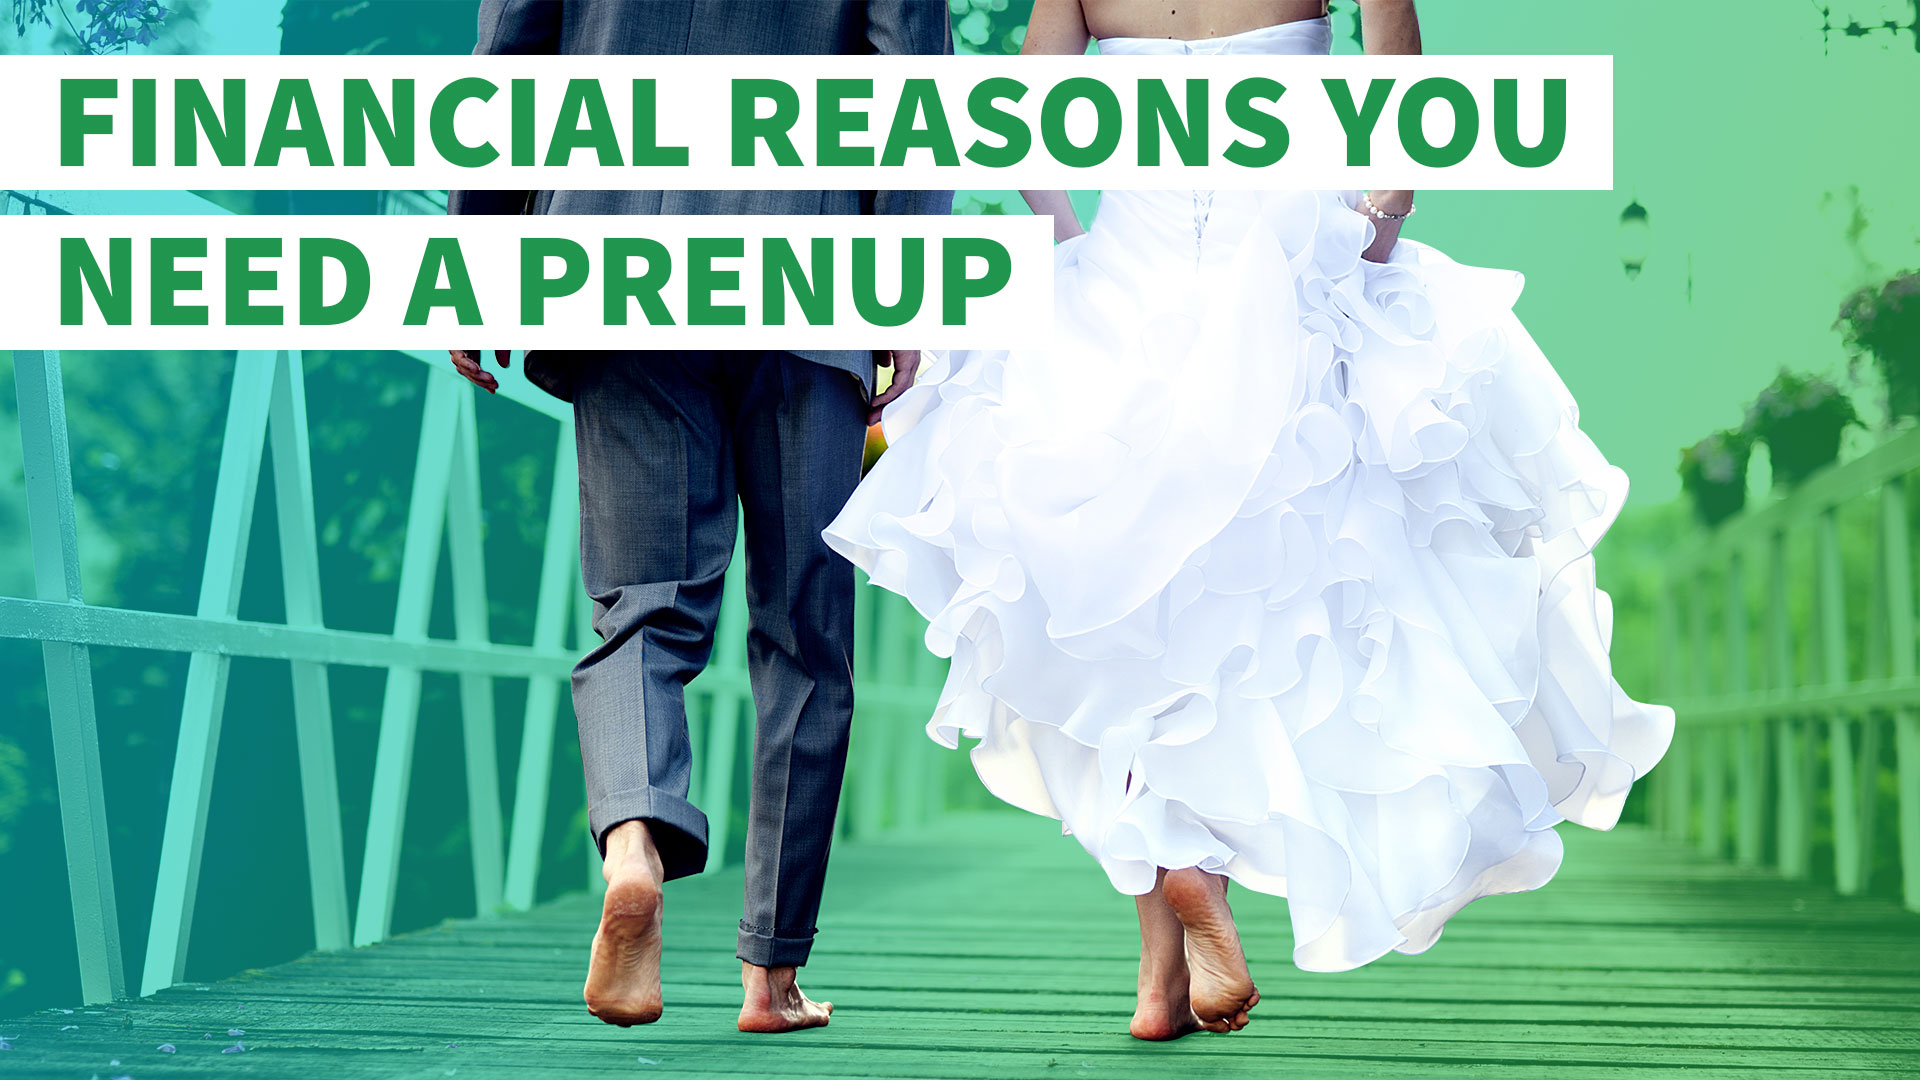 9 Financial Reasons You Need A Prenup Gobankingrates Images, Photos, Reviews